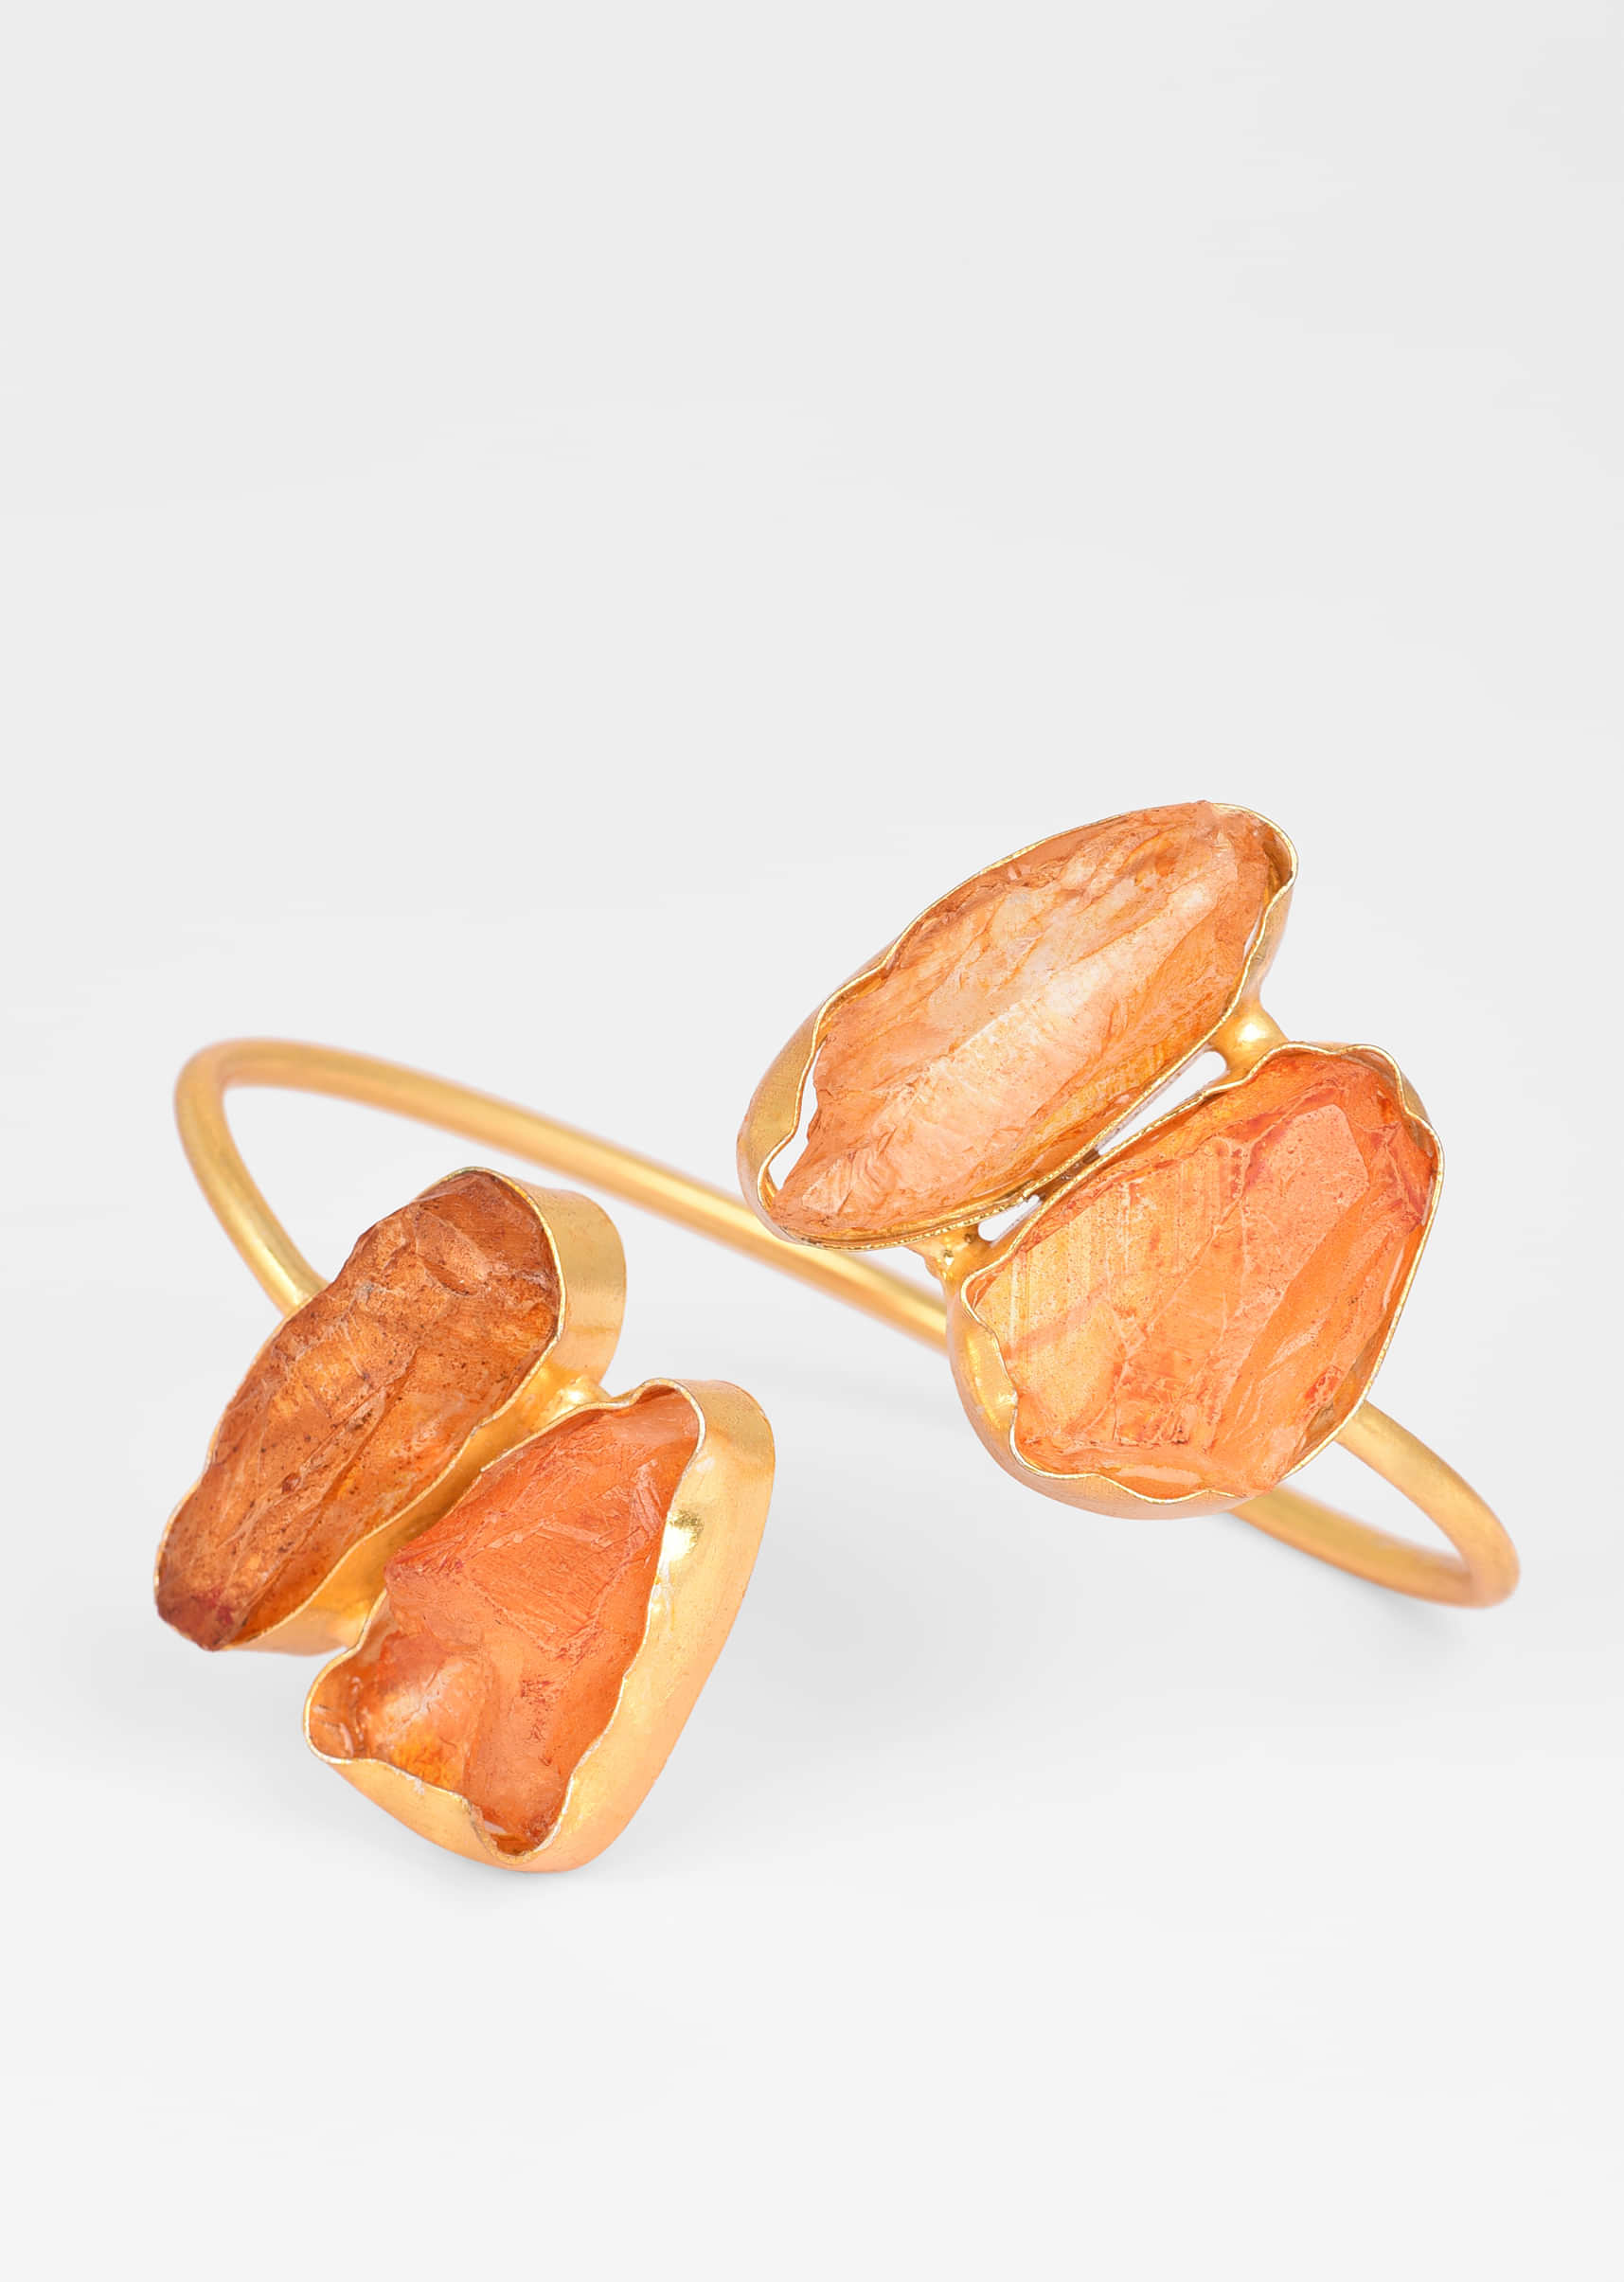 Gold Plated Wrap-Around Bangle With Natural Shaped Rust Colored Semi Precious Stones 